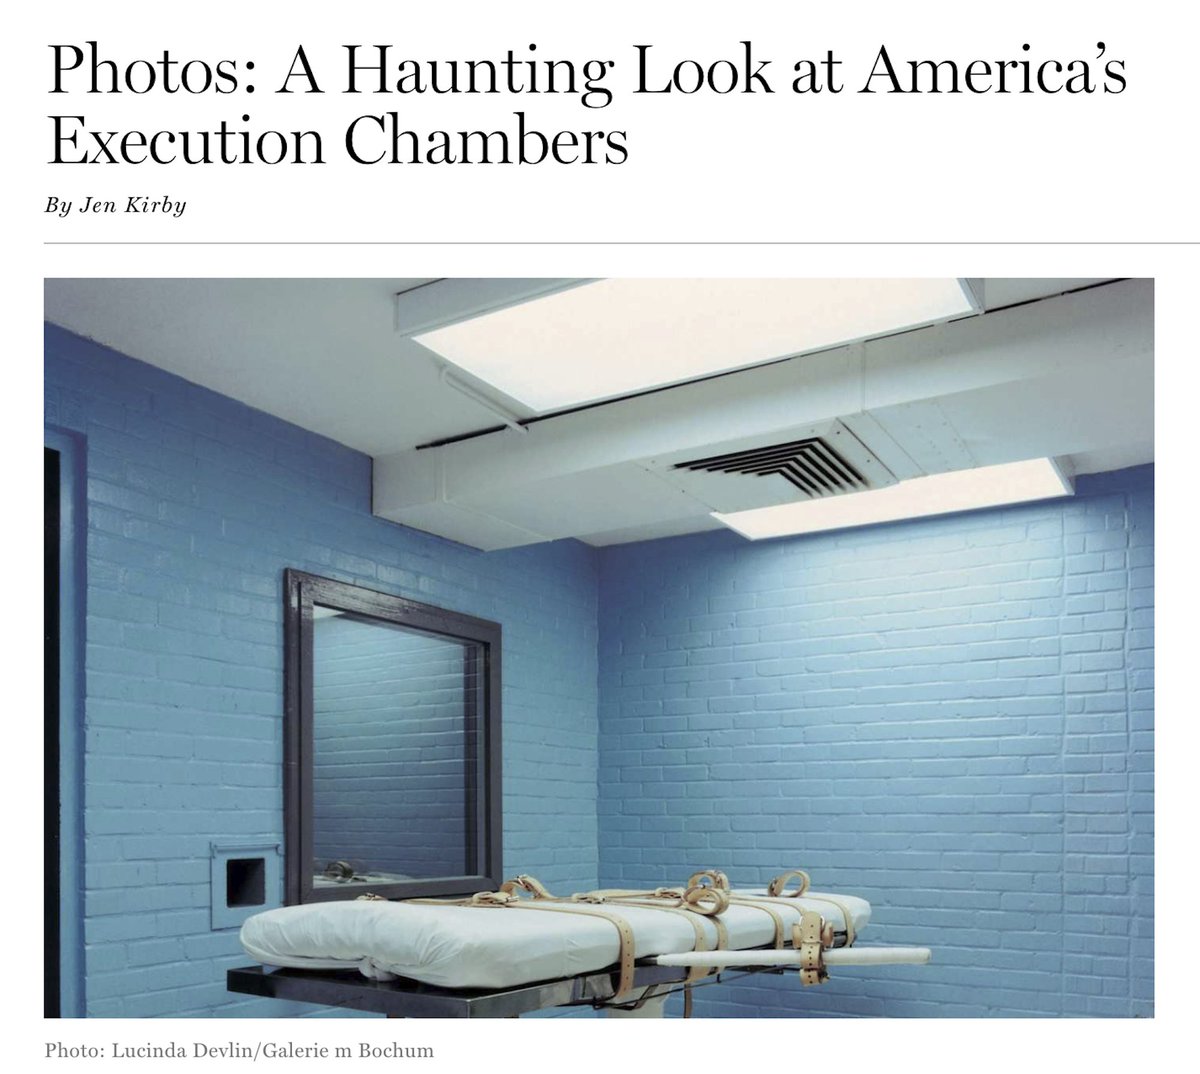 'Those Reflections May Come In The Ghostly, Eerie Images Of America’s Death Chambers, Collected From Some Of The 32 States Where The Death Penalty Is Still Legal.'By Jen Kirby, New York 'Intelligencer'.May 16th, 2014 https://nymag.com/intelligencer/2014/05/haunting-photos-of-us-death-chambers.html(To Be Continued.)